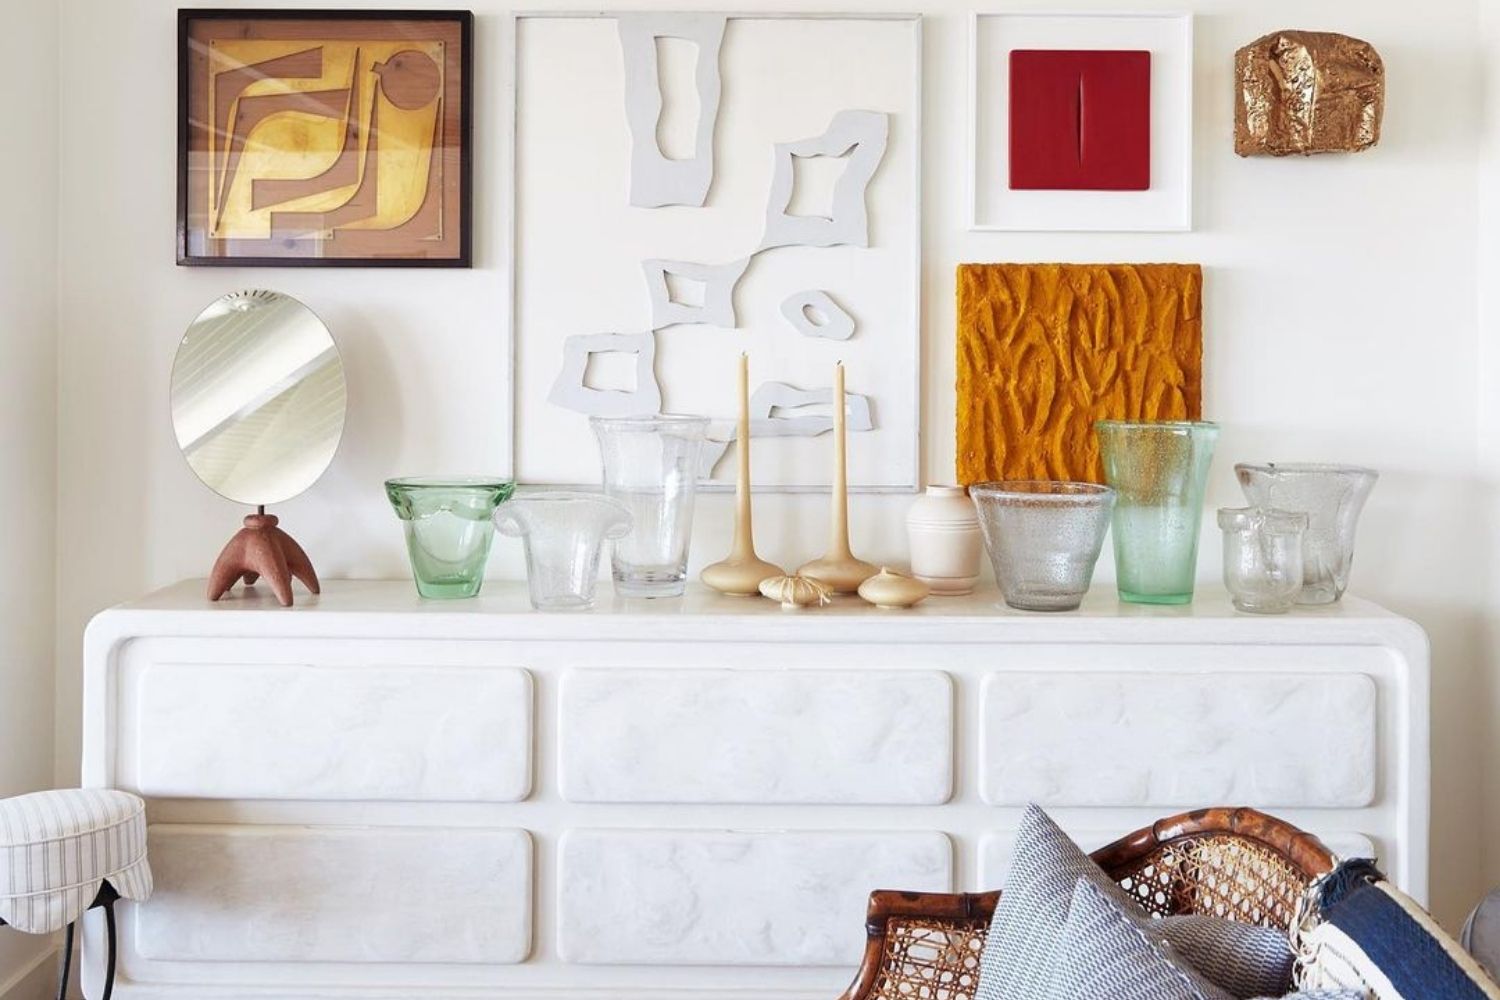 In Need Of Some Home Decor Inspiration? These Eight Instagrams Are The Ones To Follow